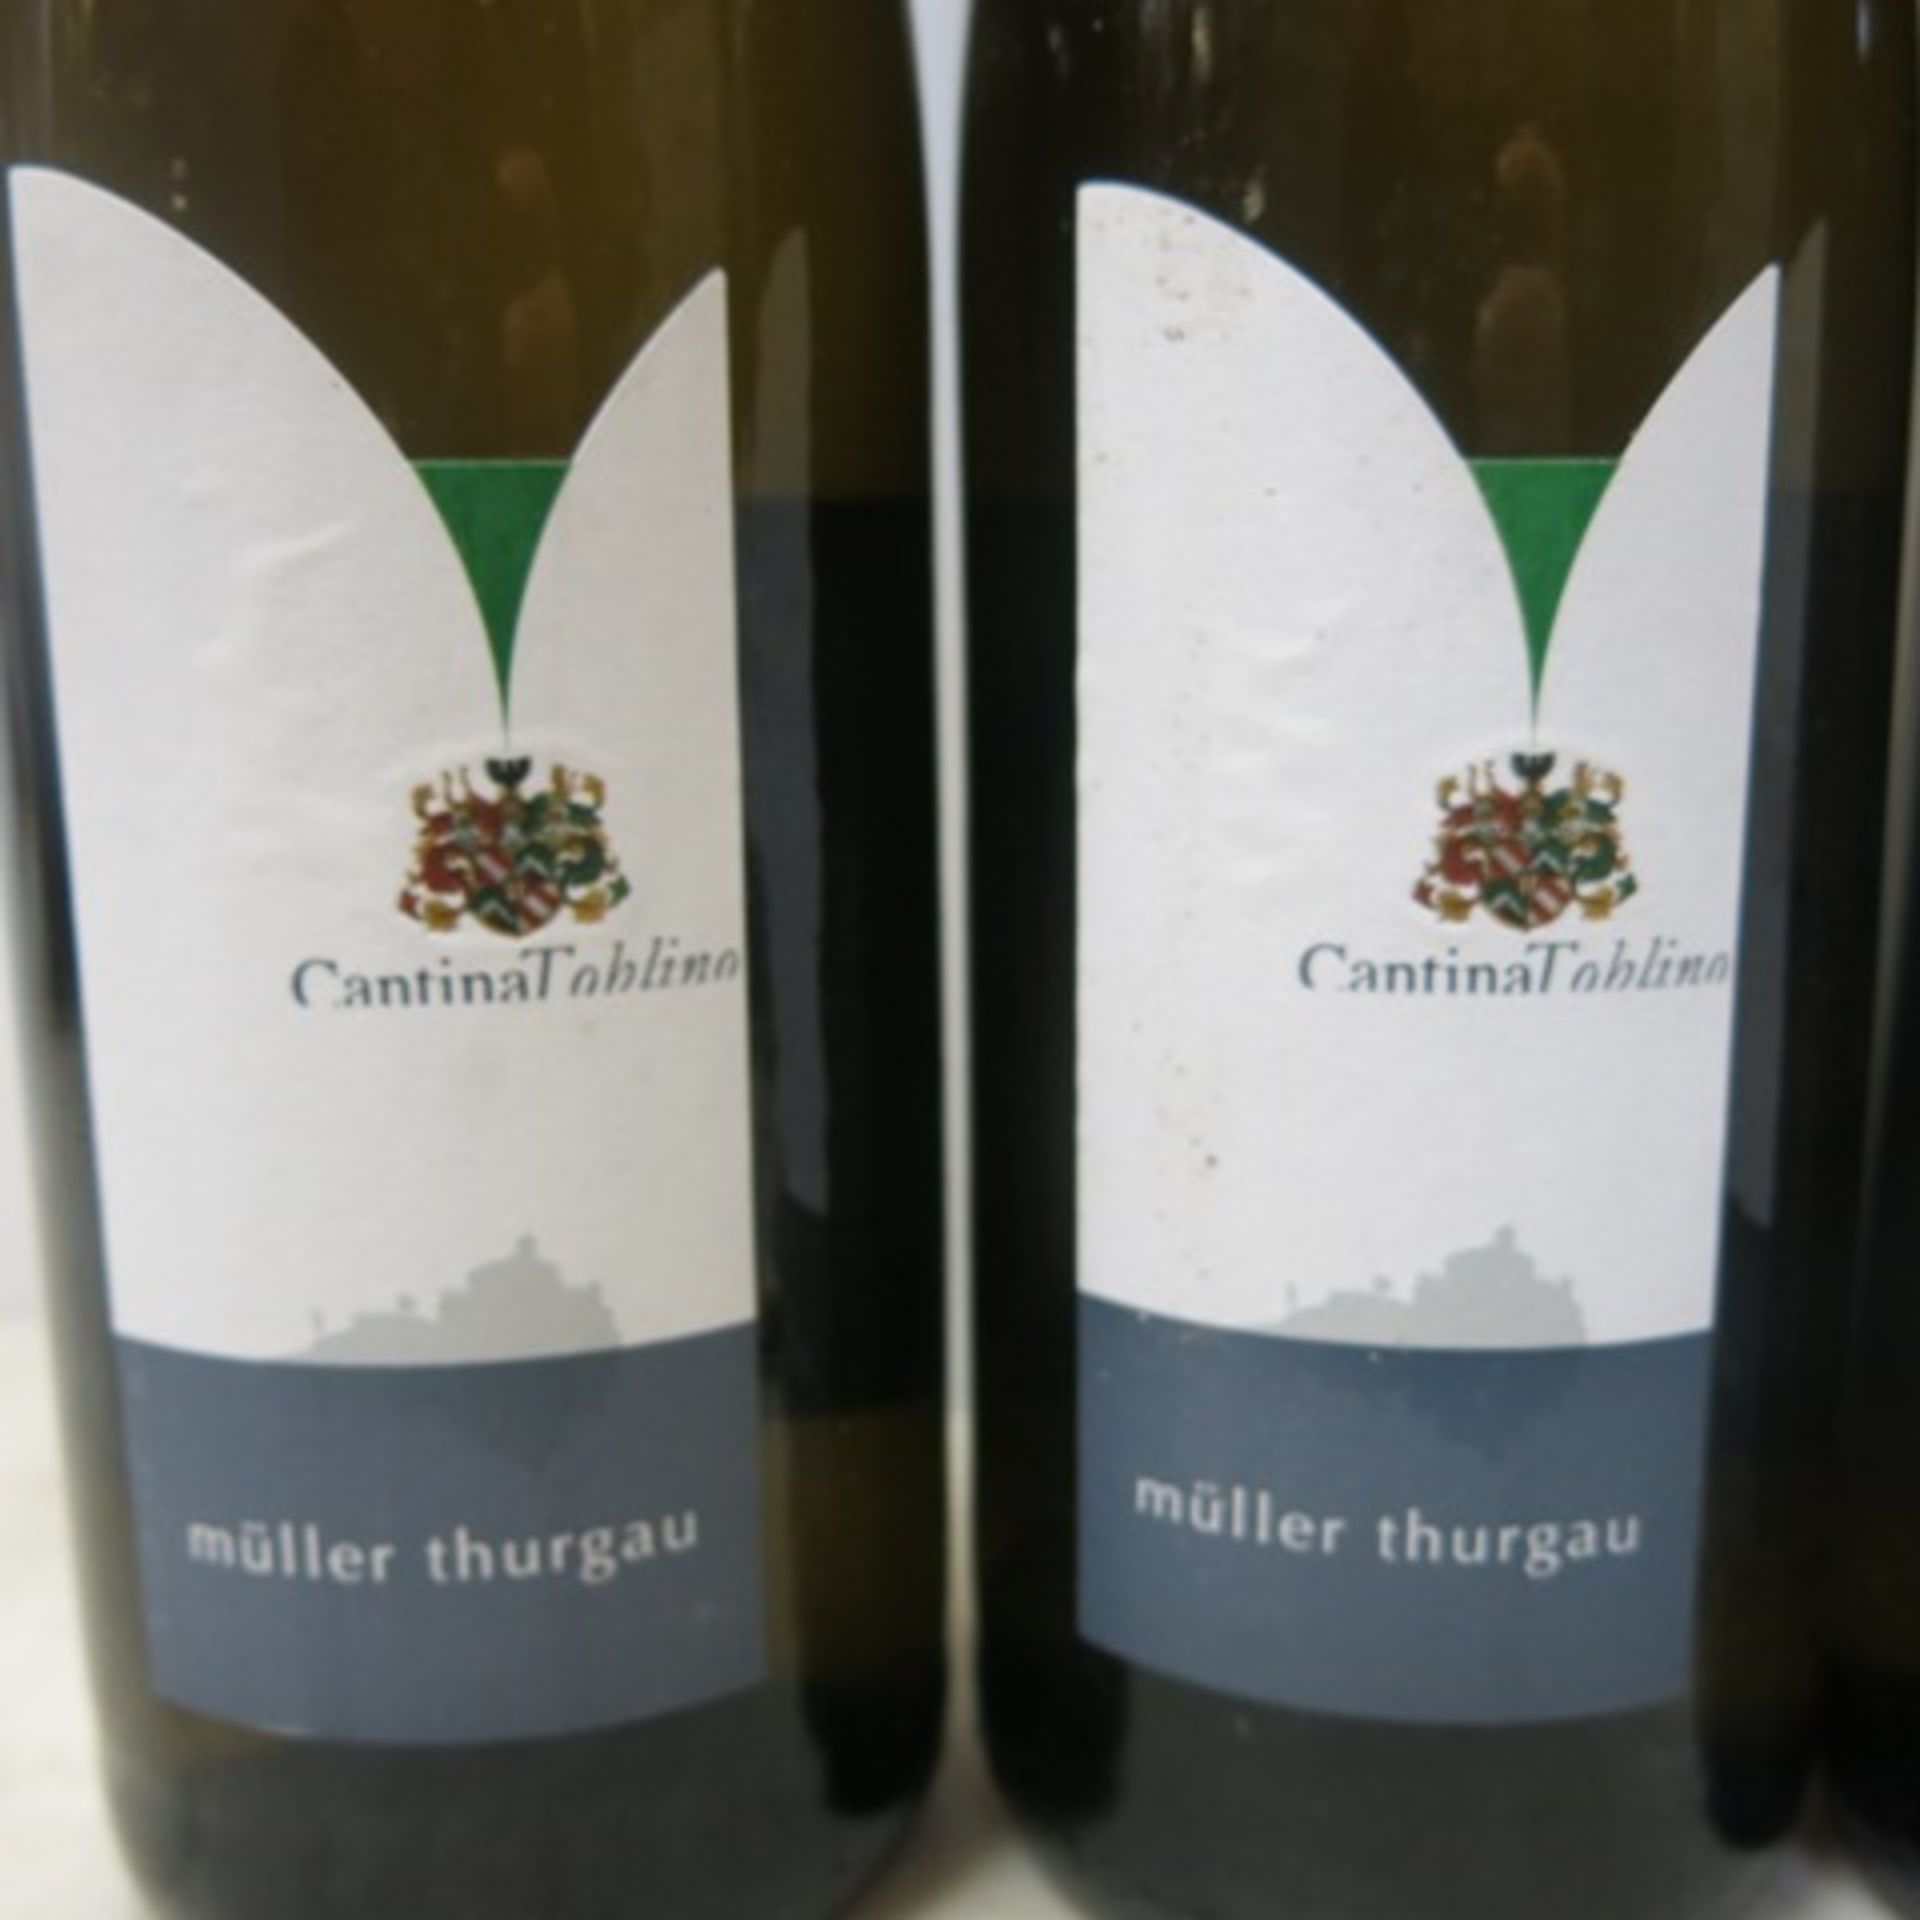 6 x Bottles of Cantina Toblino Muller Thurgau White Wine, Year 2016. Total RRP £80.00 - Image 2 of 3